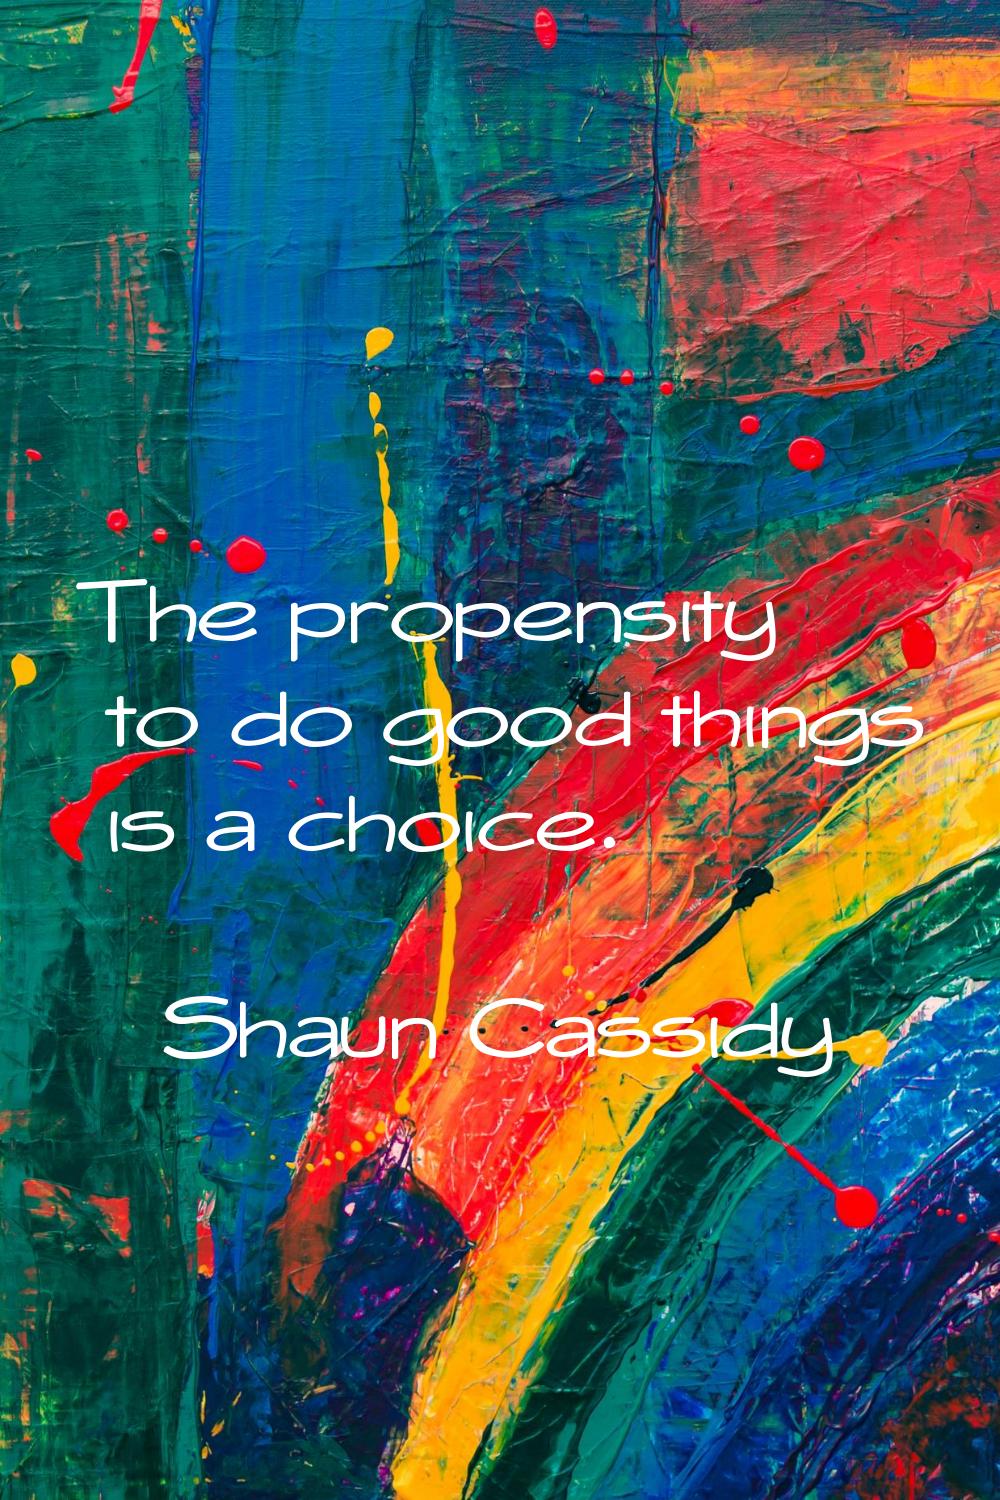 The propensity to do good things is a choice.